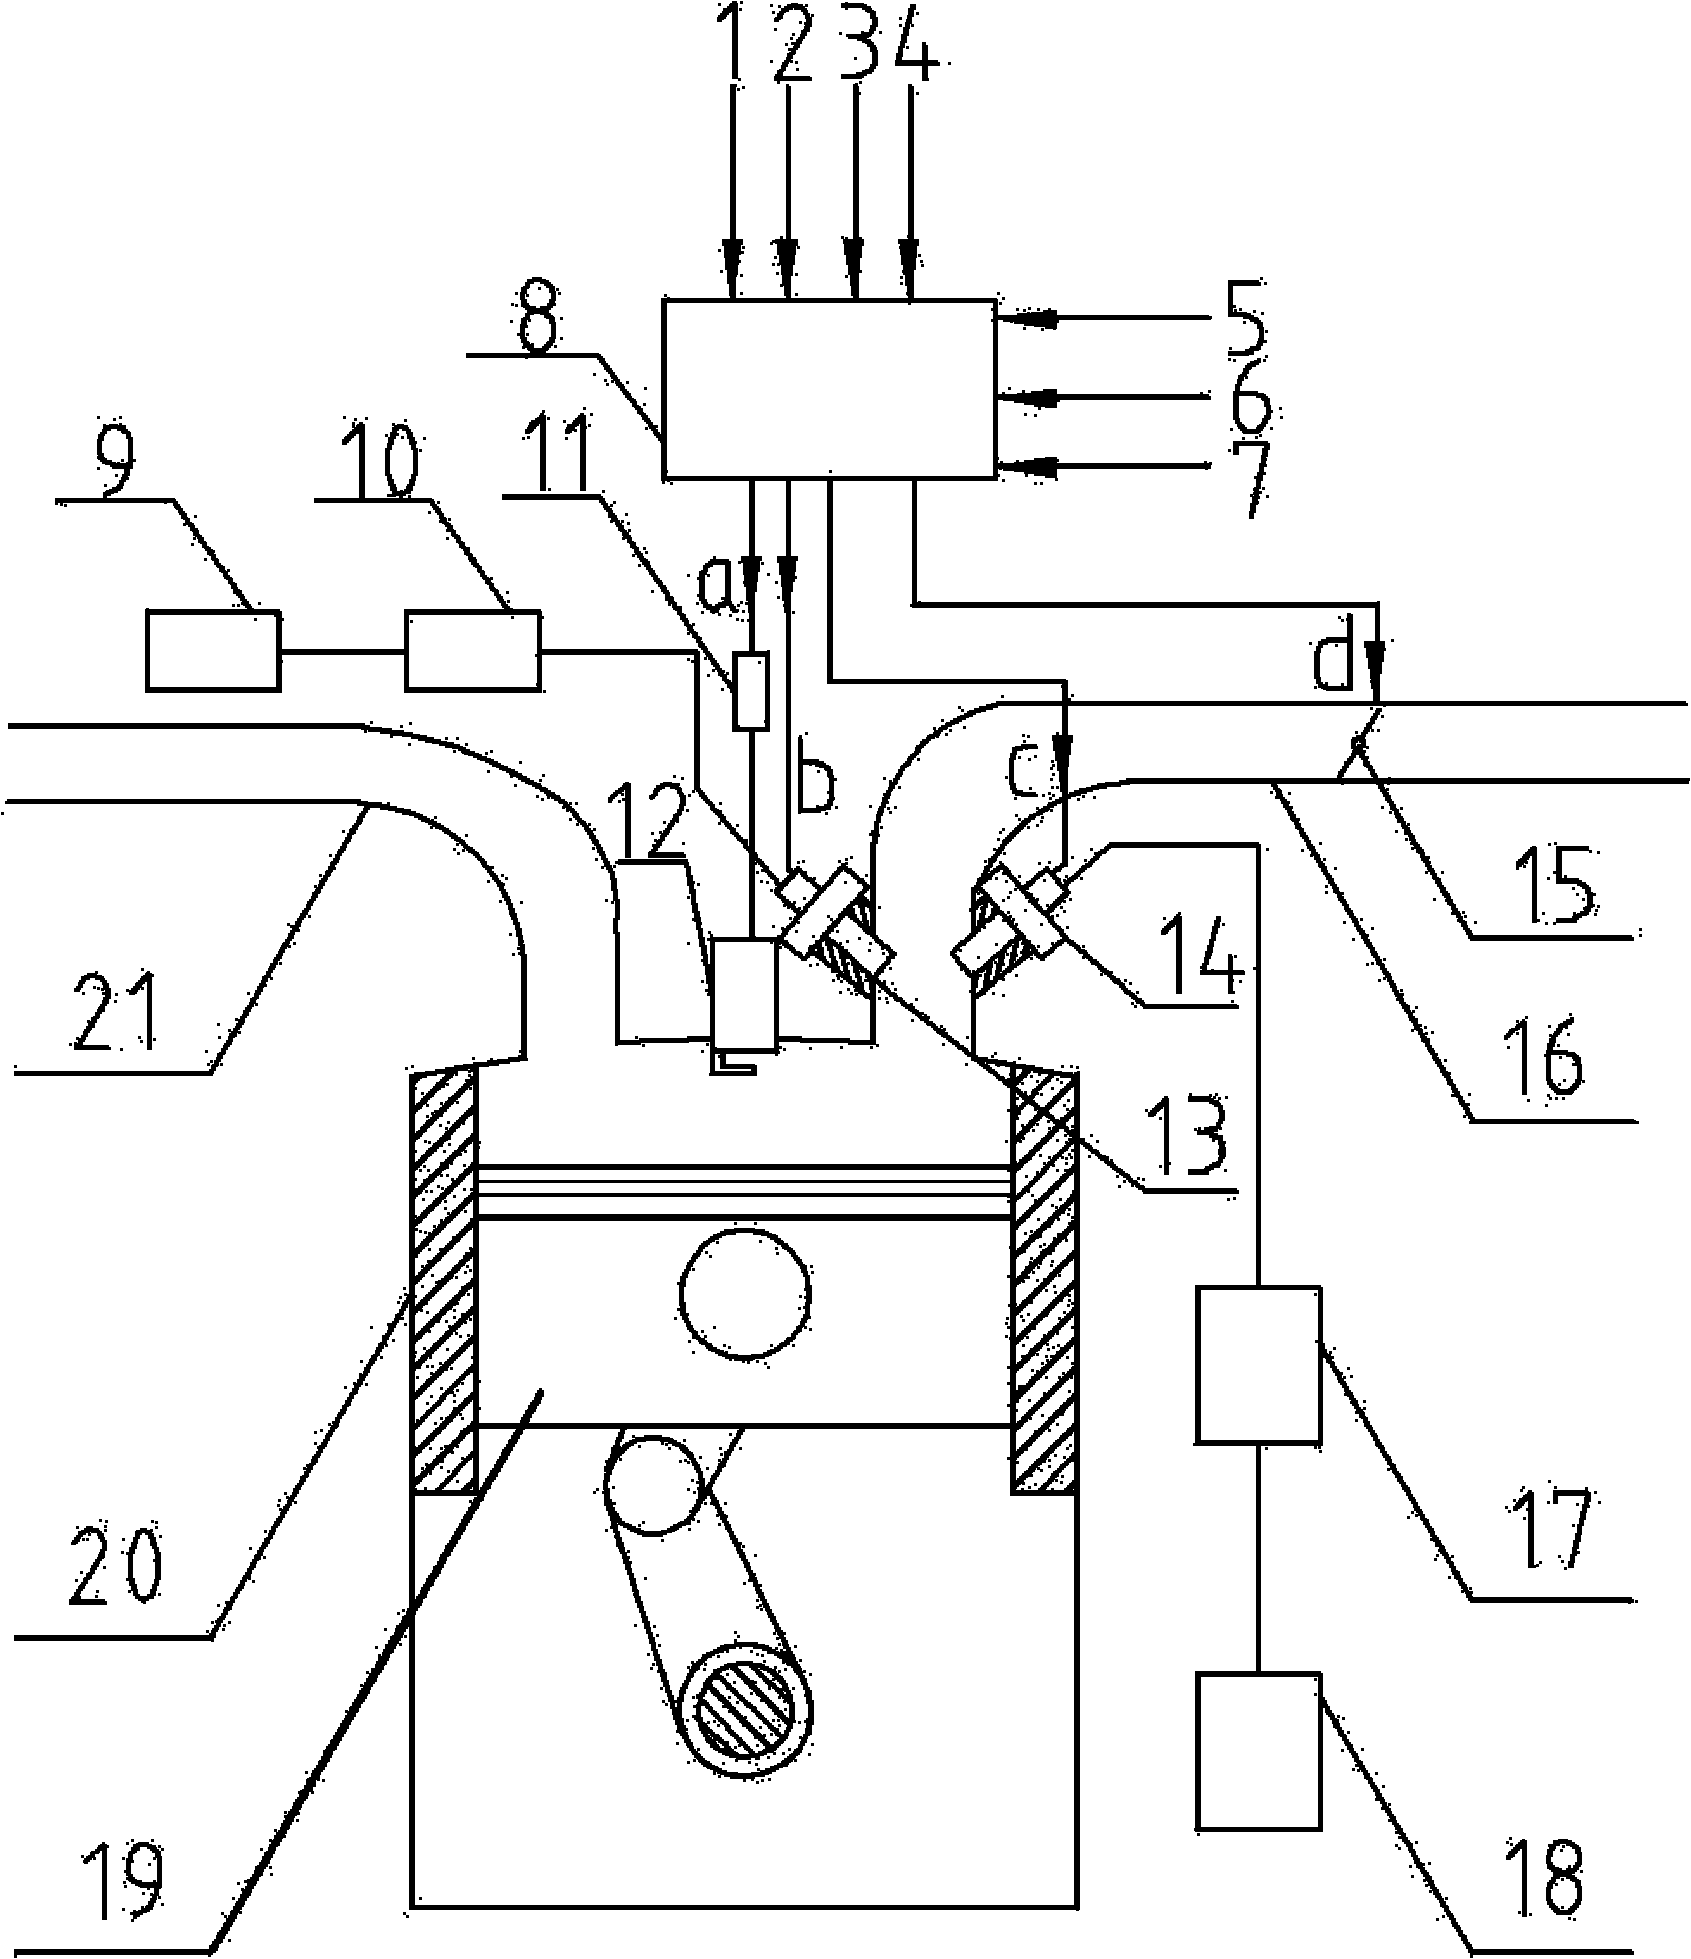 Control method of combustion engine using dimethyl ether and high-octane rating fuel